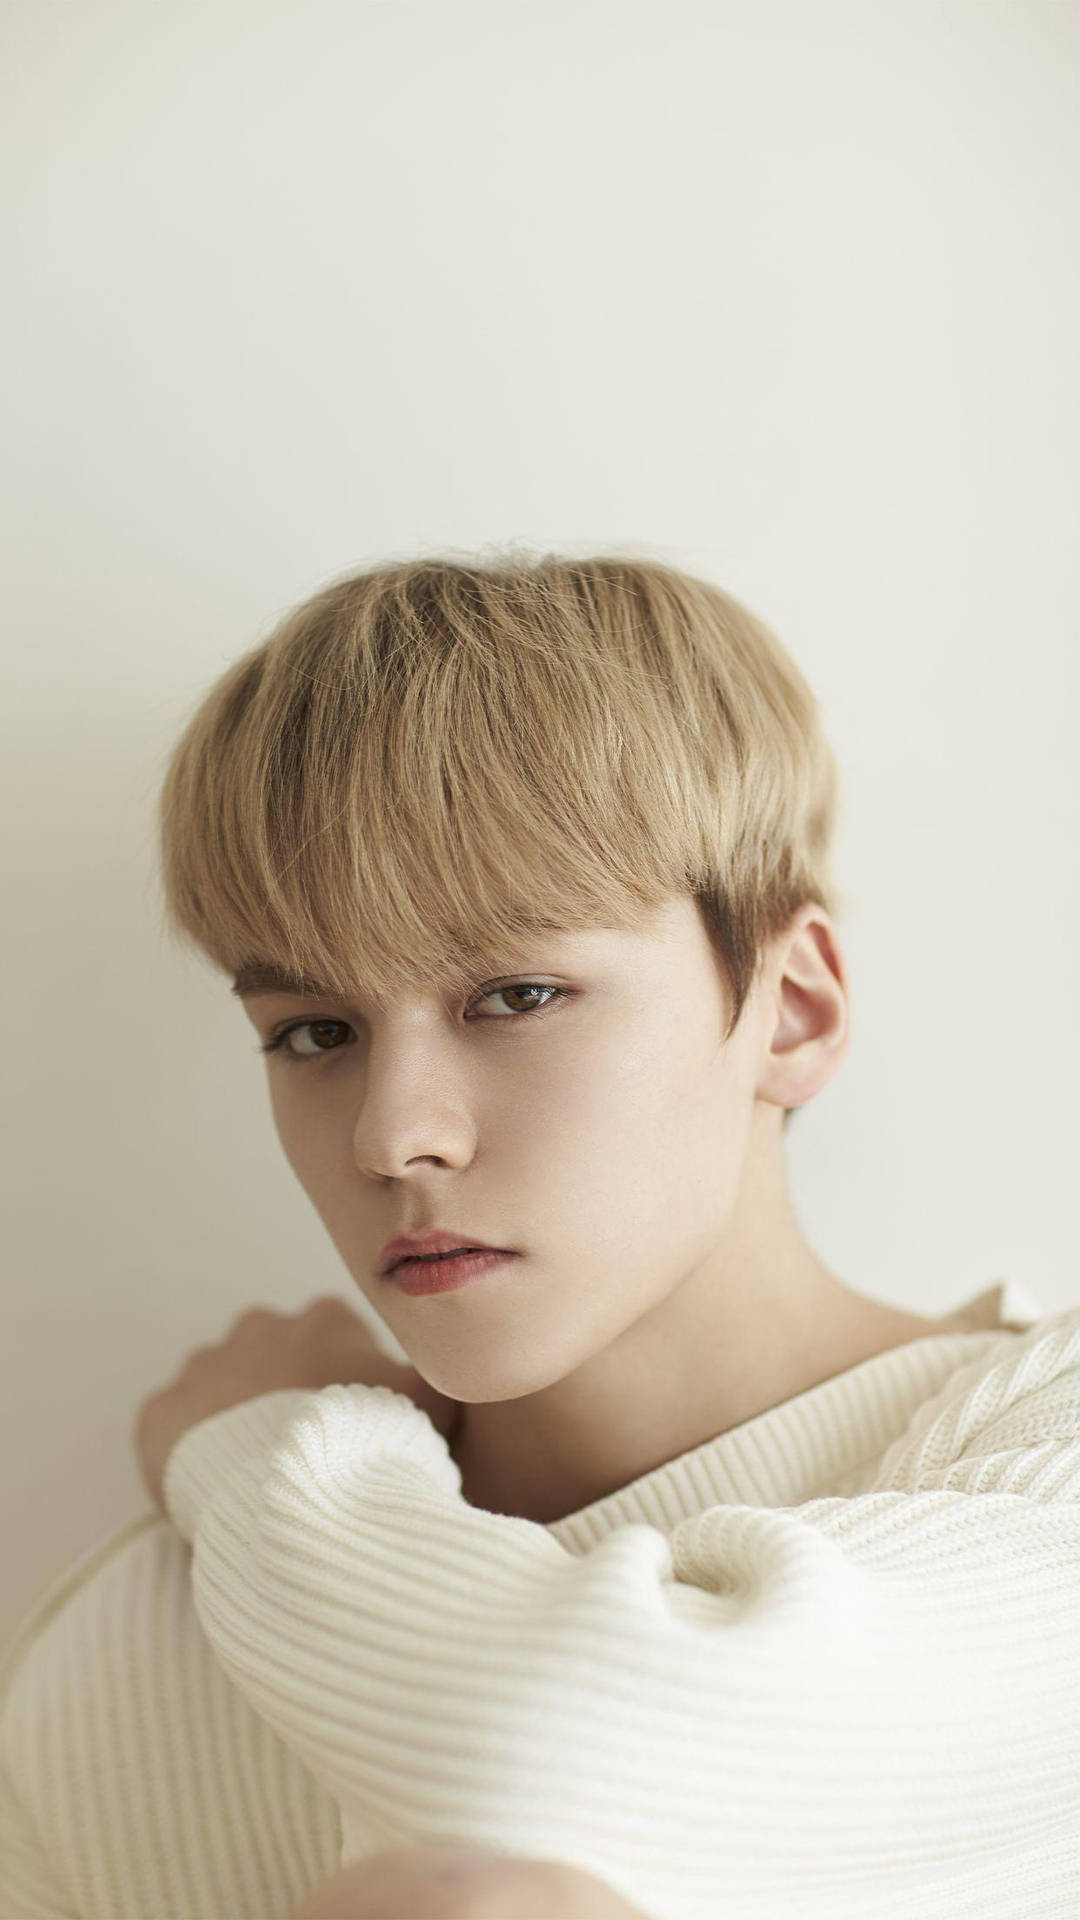 Vernon With Faded Blonde Hair Background